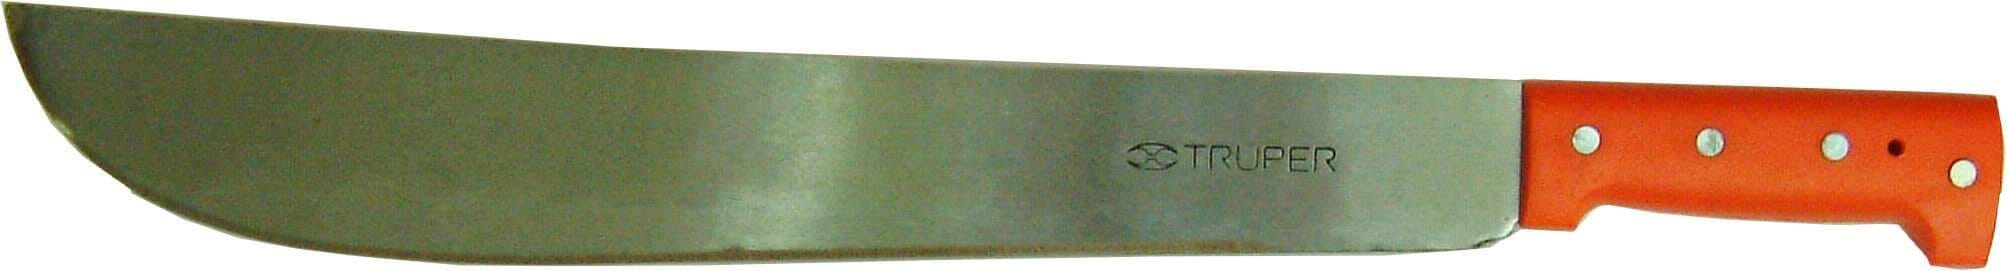 Truper Machette with Rivetted Handle 350mm